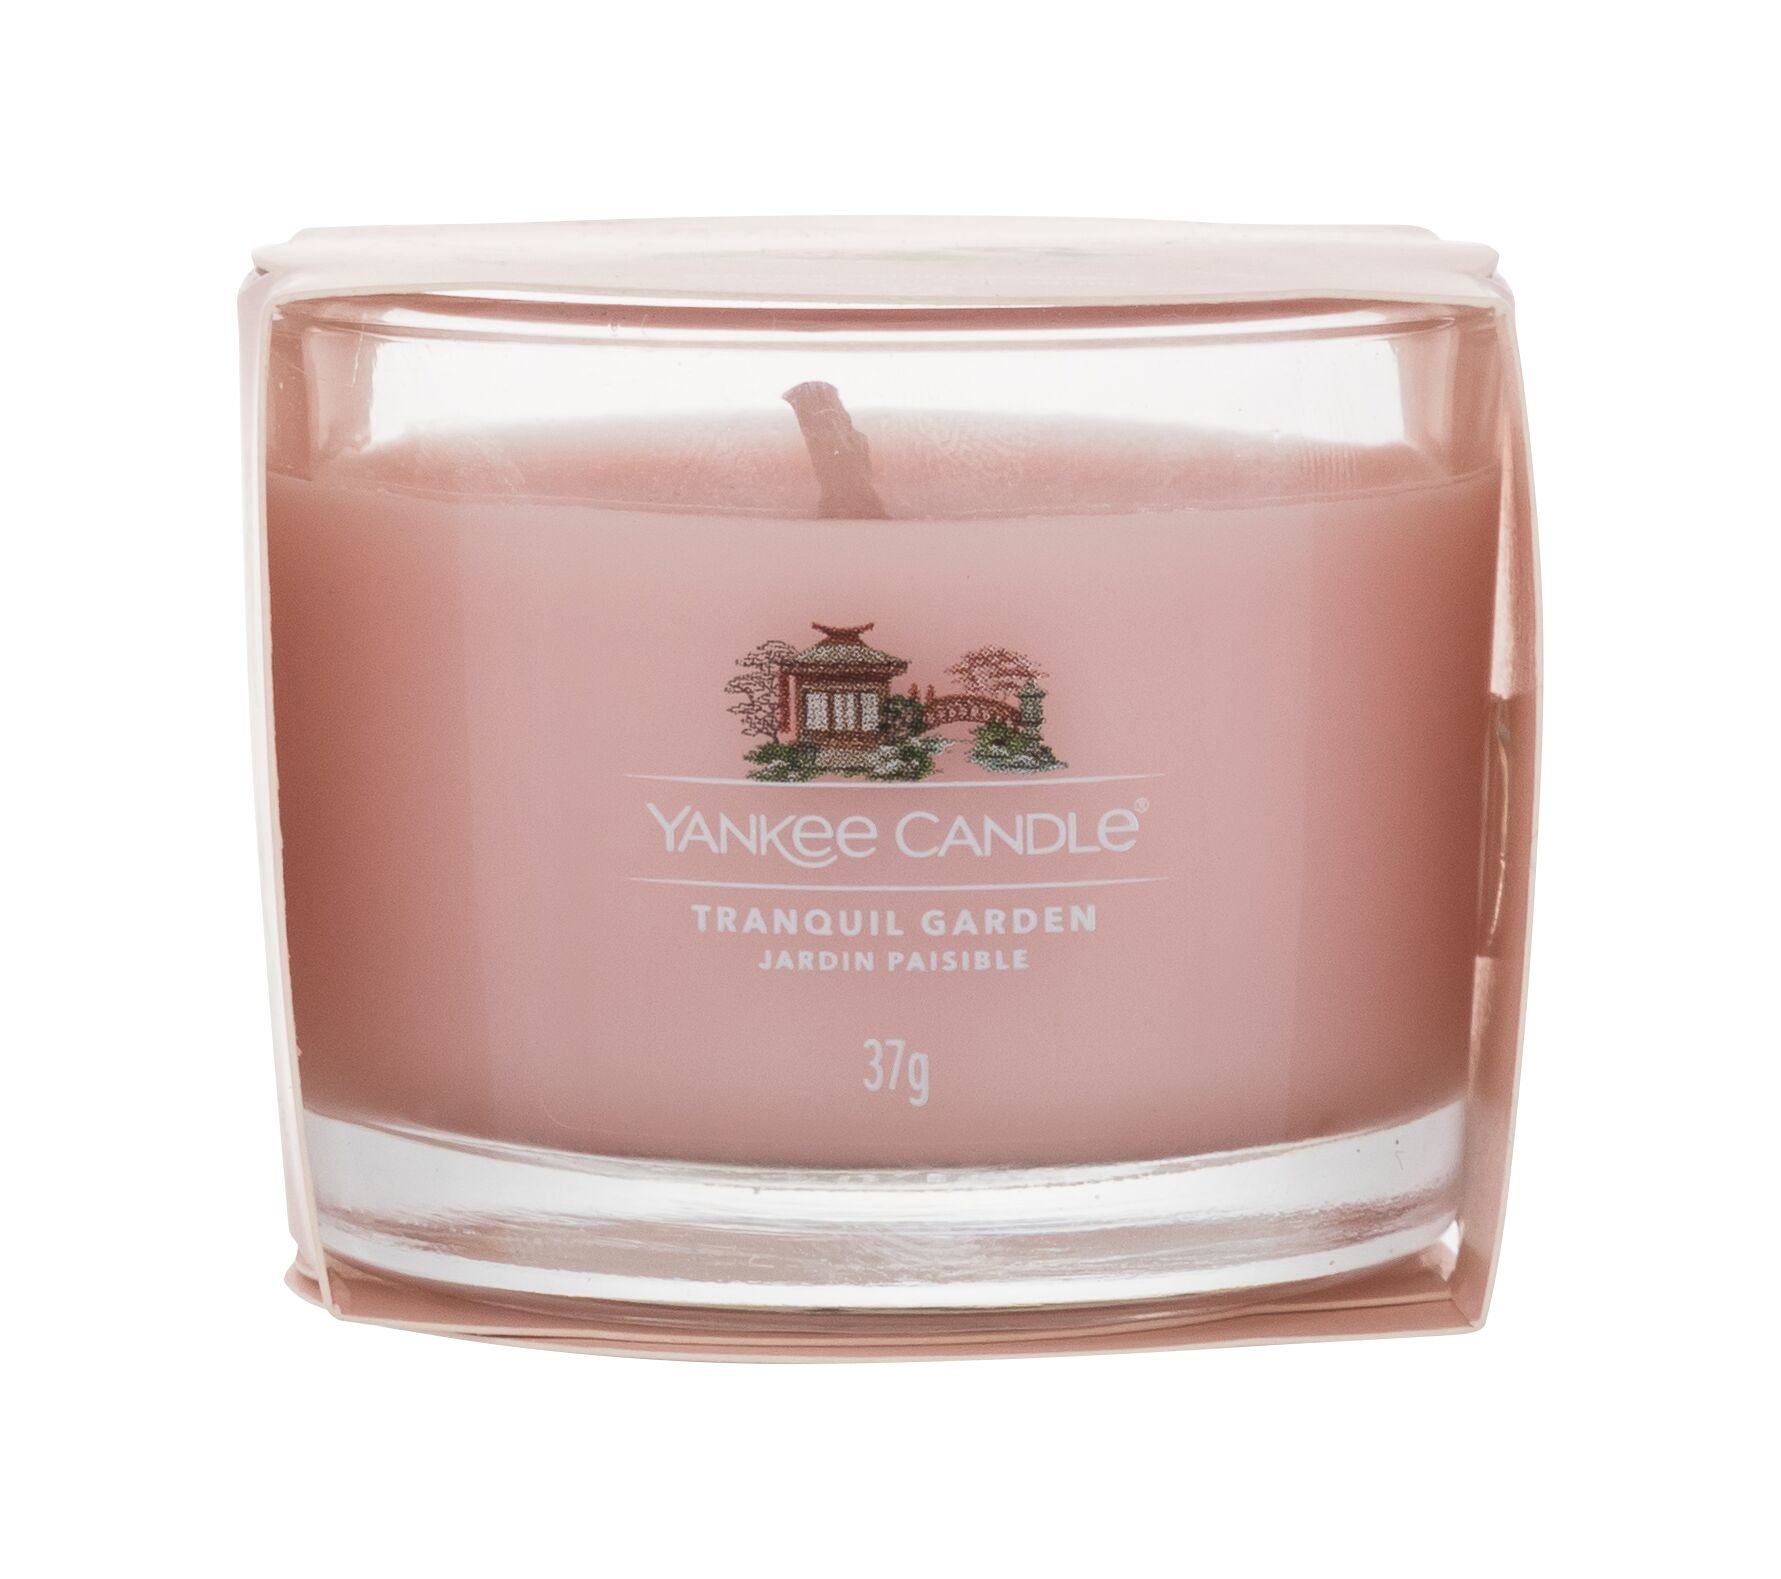 Yankee Candle Tranquil Garden 37g Kvepalai Unisex Scented Candle